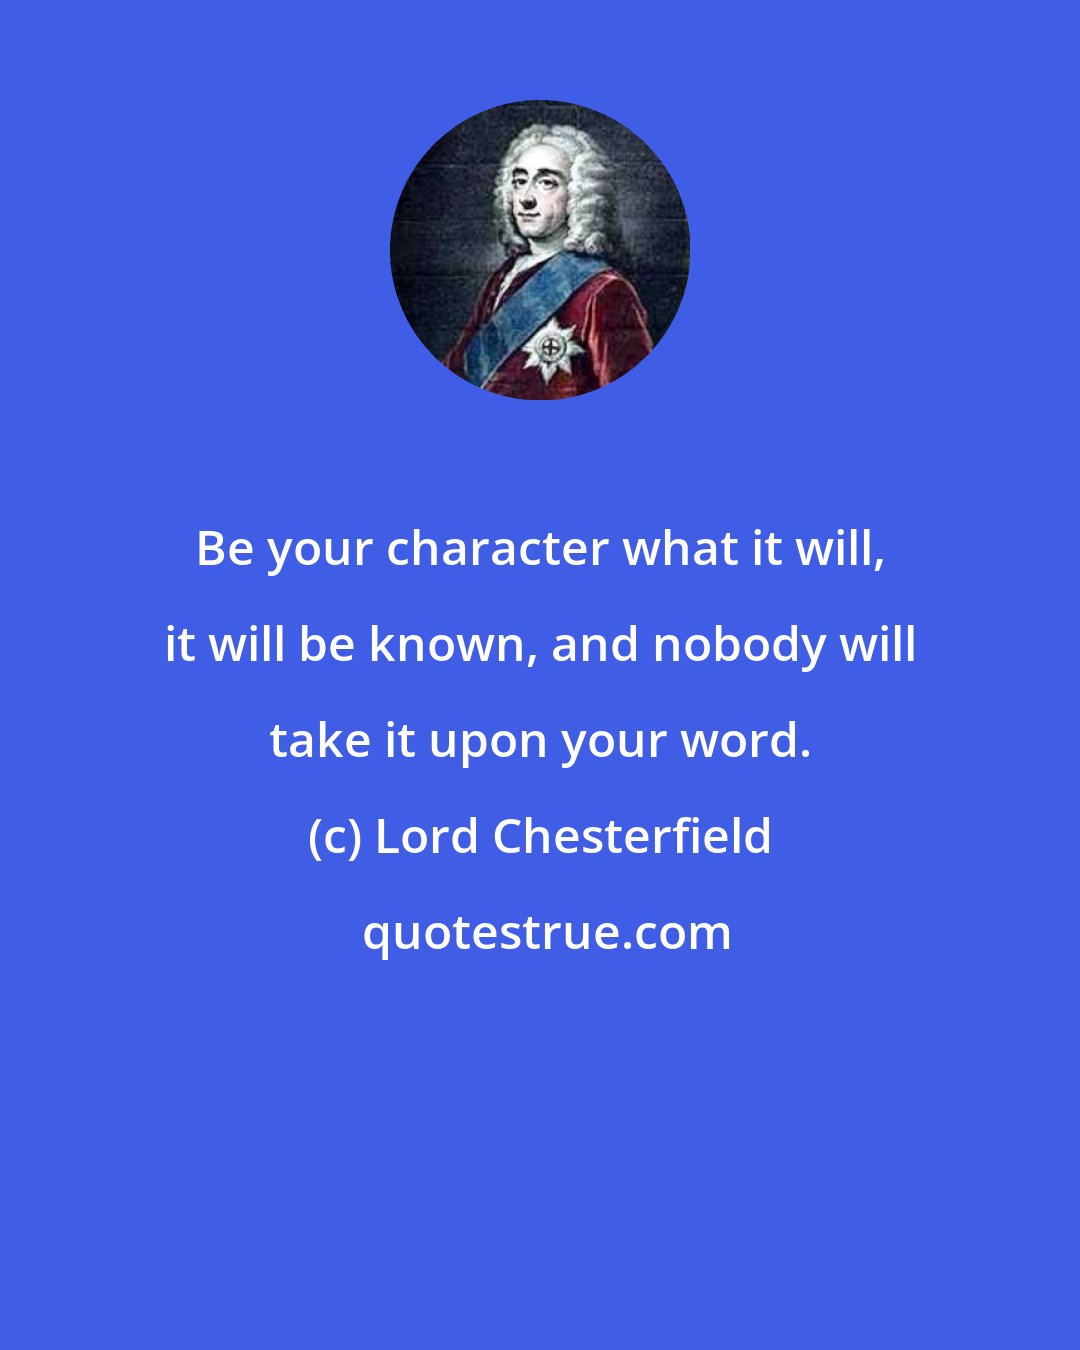 Lord Chesterfield: Be your character what it will, it will be known, and nobody will take it upon your word.